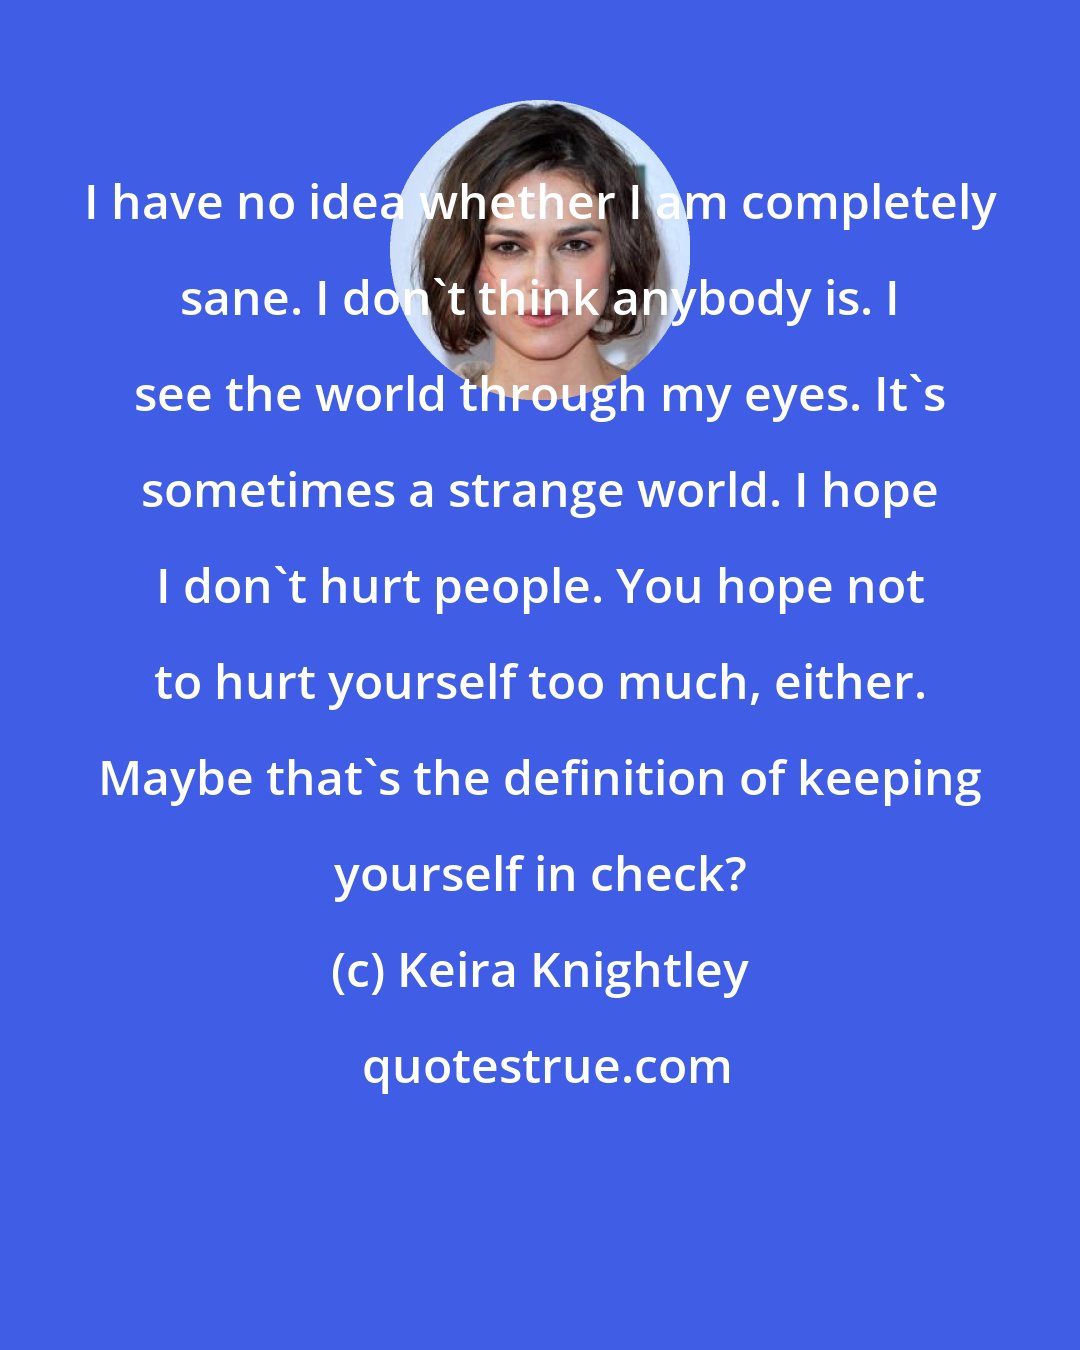 Keira Knightley: I have no idea whether I am completely sane. I don't think anybody is. I see the world through my eyes. It's sometimes a strange world. I hope I don't hurt people. You hope not to hurt yourself too much, either. Maybe that's the definition of keeping yourself in check?